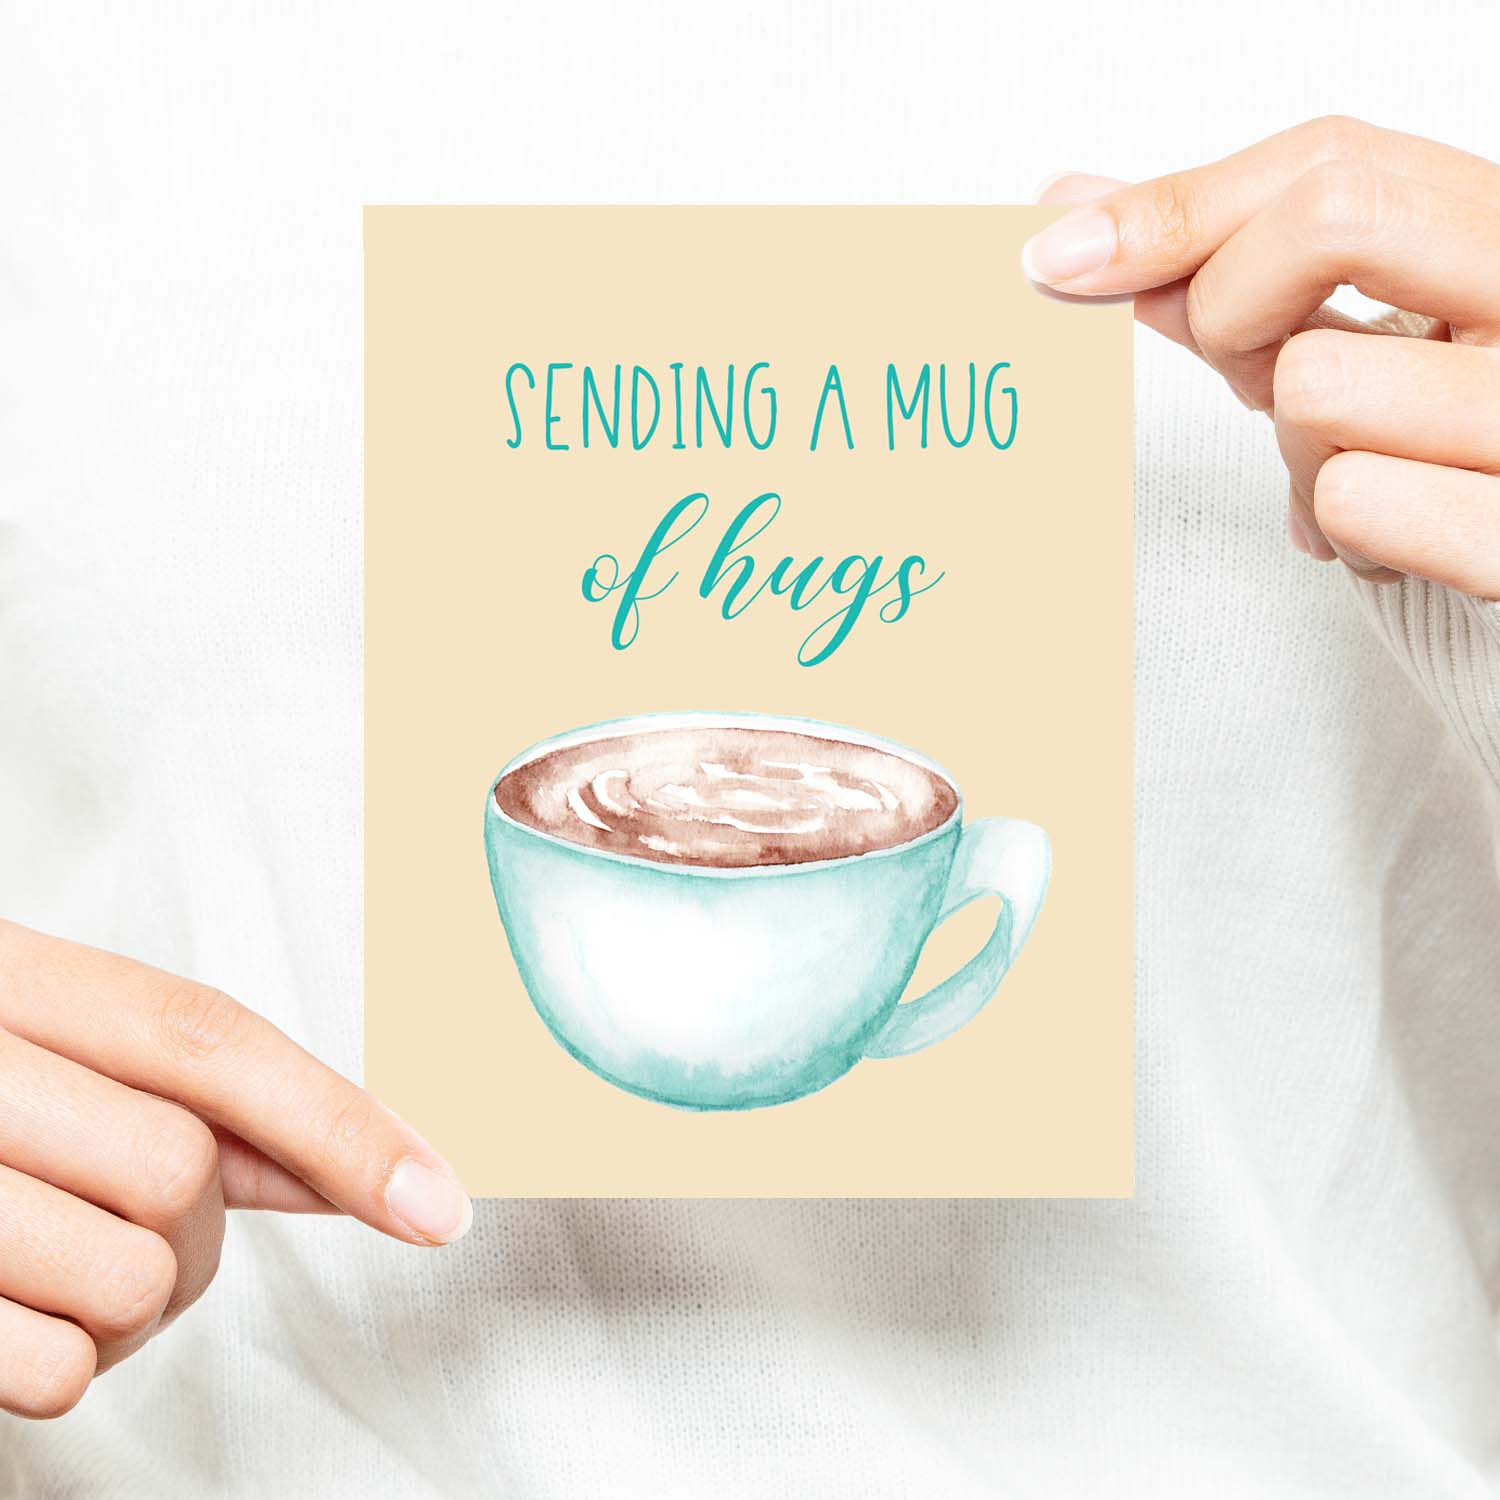 blue watercolor coffee mug filled with coffee friendship card that says sending a mug of hugs  with a white A2 envelope shown with a woman in a white sweater holding card